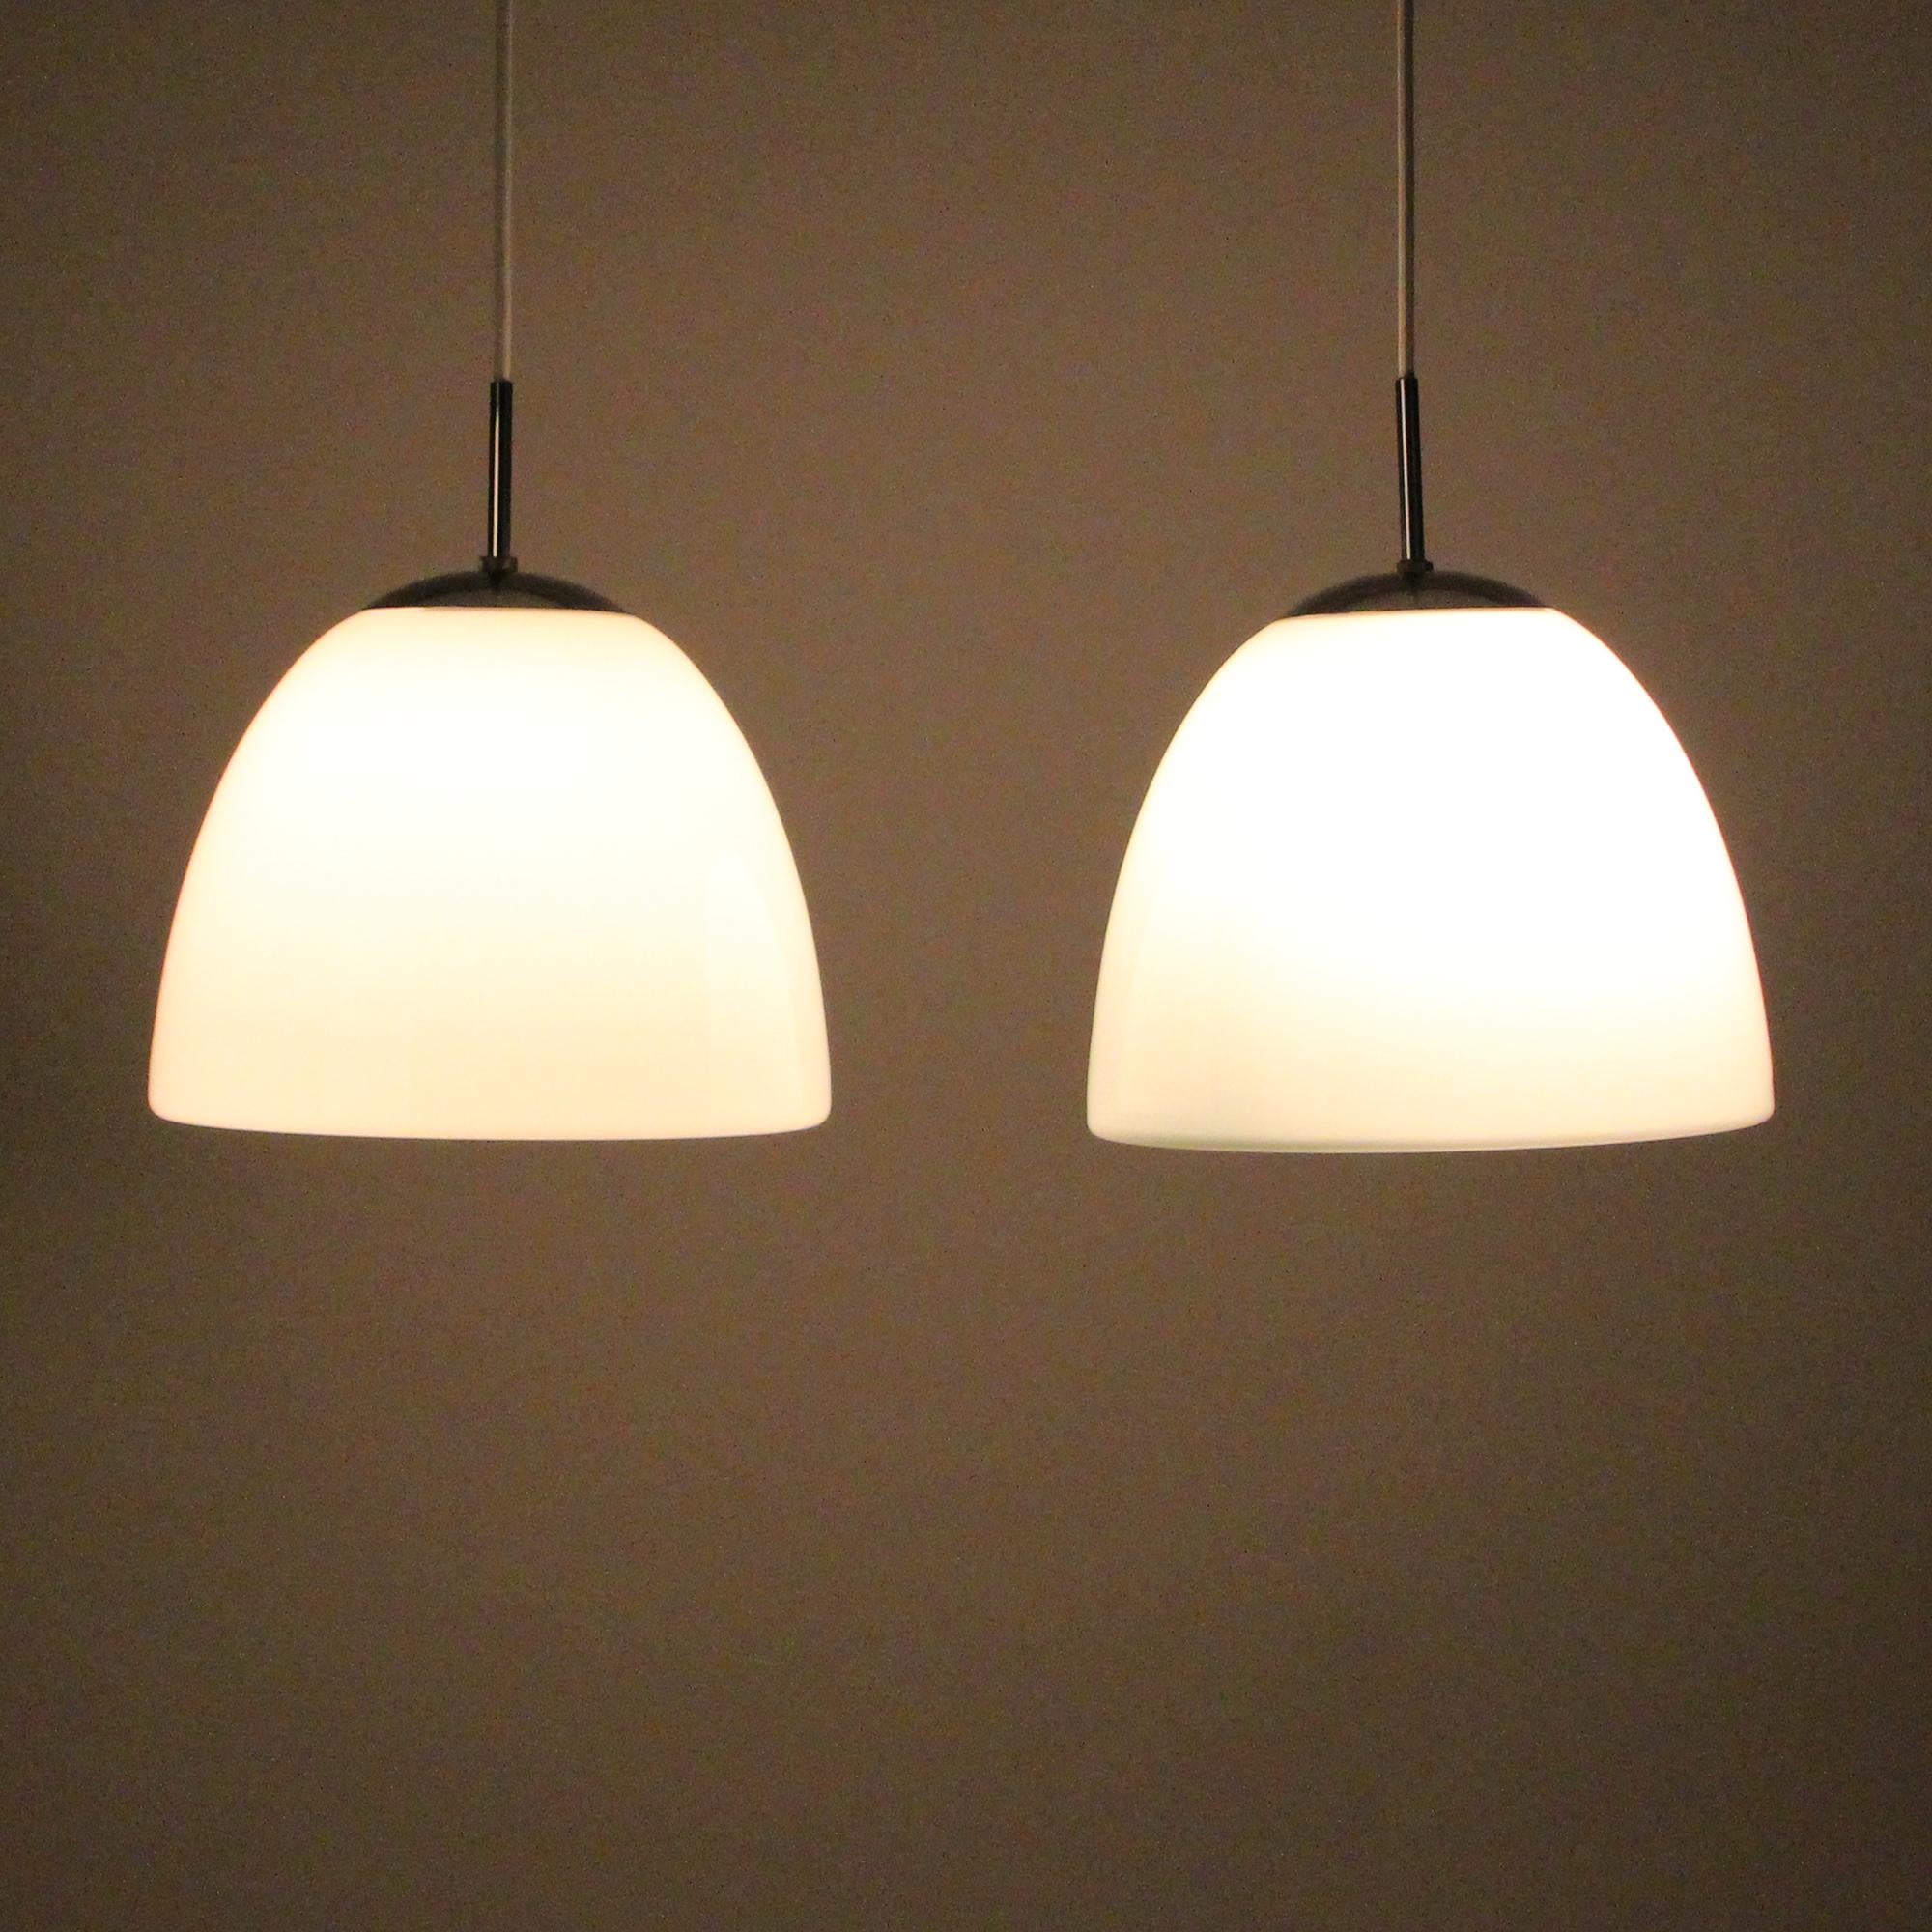 Delta Klokkependel or bell pendant - produced by Louis Poulsen in 1967. Pair of Classic Danish midcentury glass lights in excellent vintage condition.

A beautiful opal blown glass shade with a bell-like shape, closed bottom and chrome-plated top.